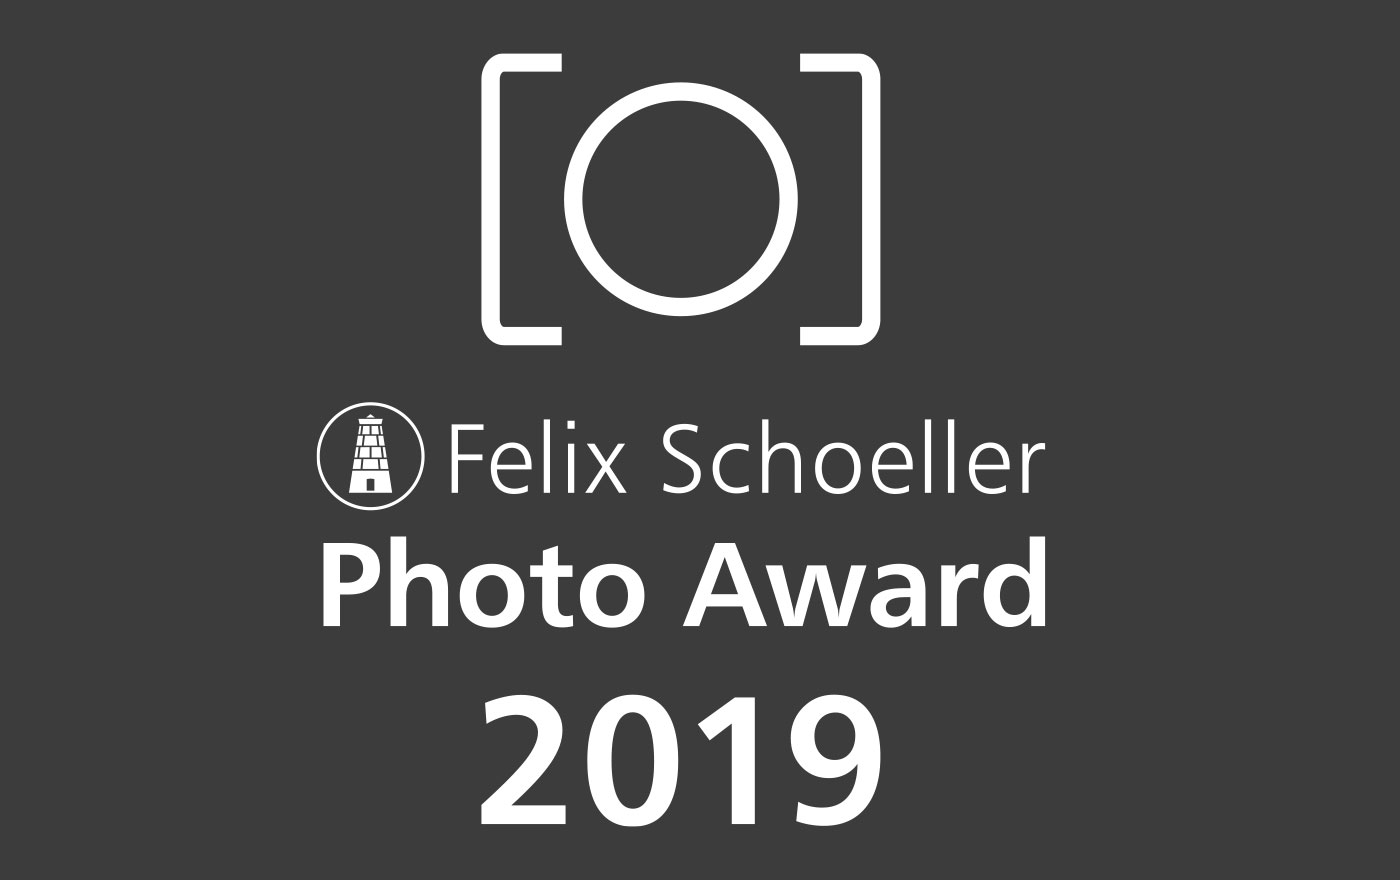 The Felix Schoeller Photo Award 2019 is also opening the competition to fashion photographers.